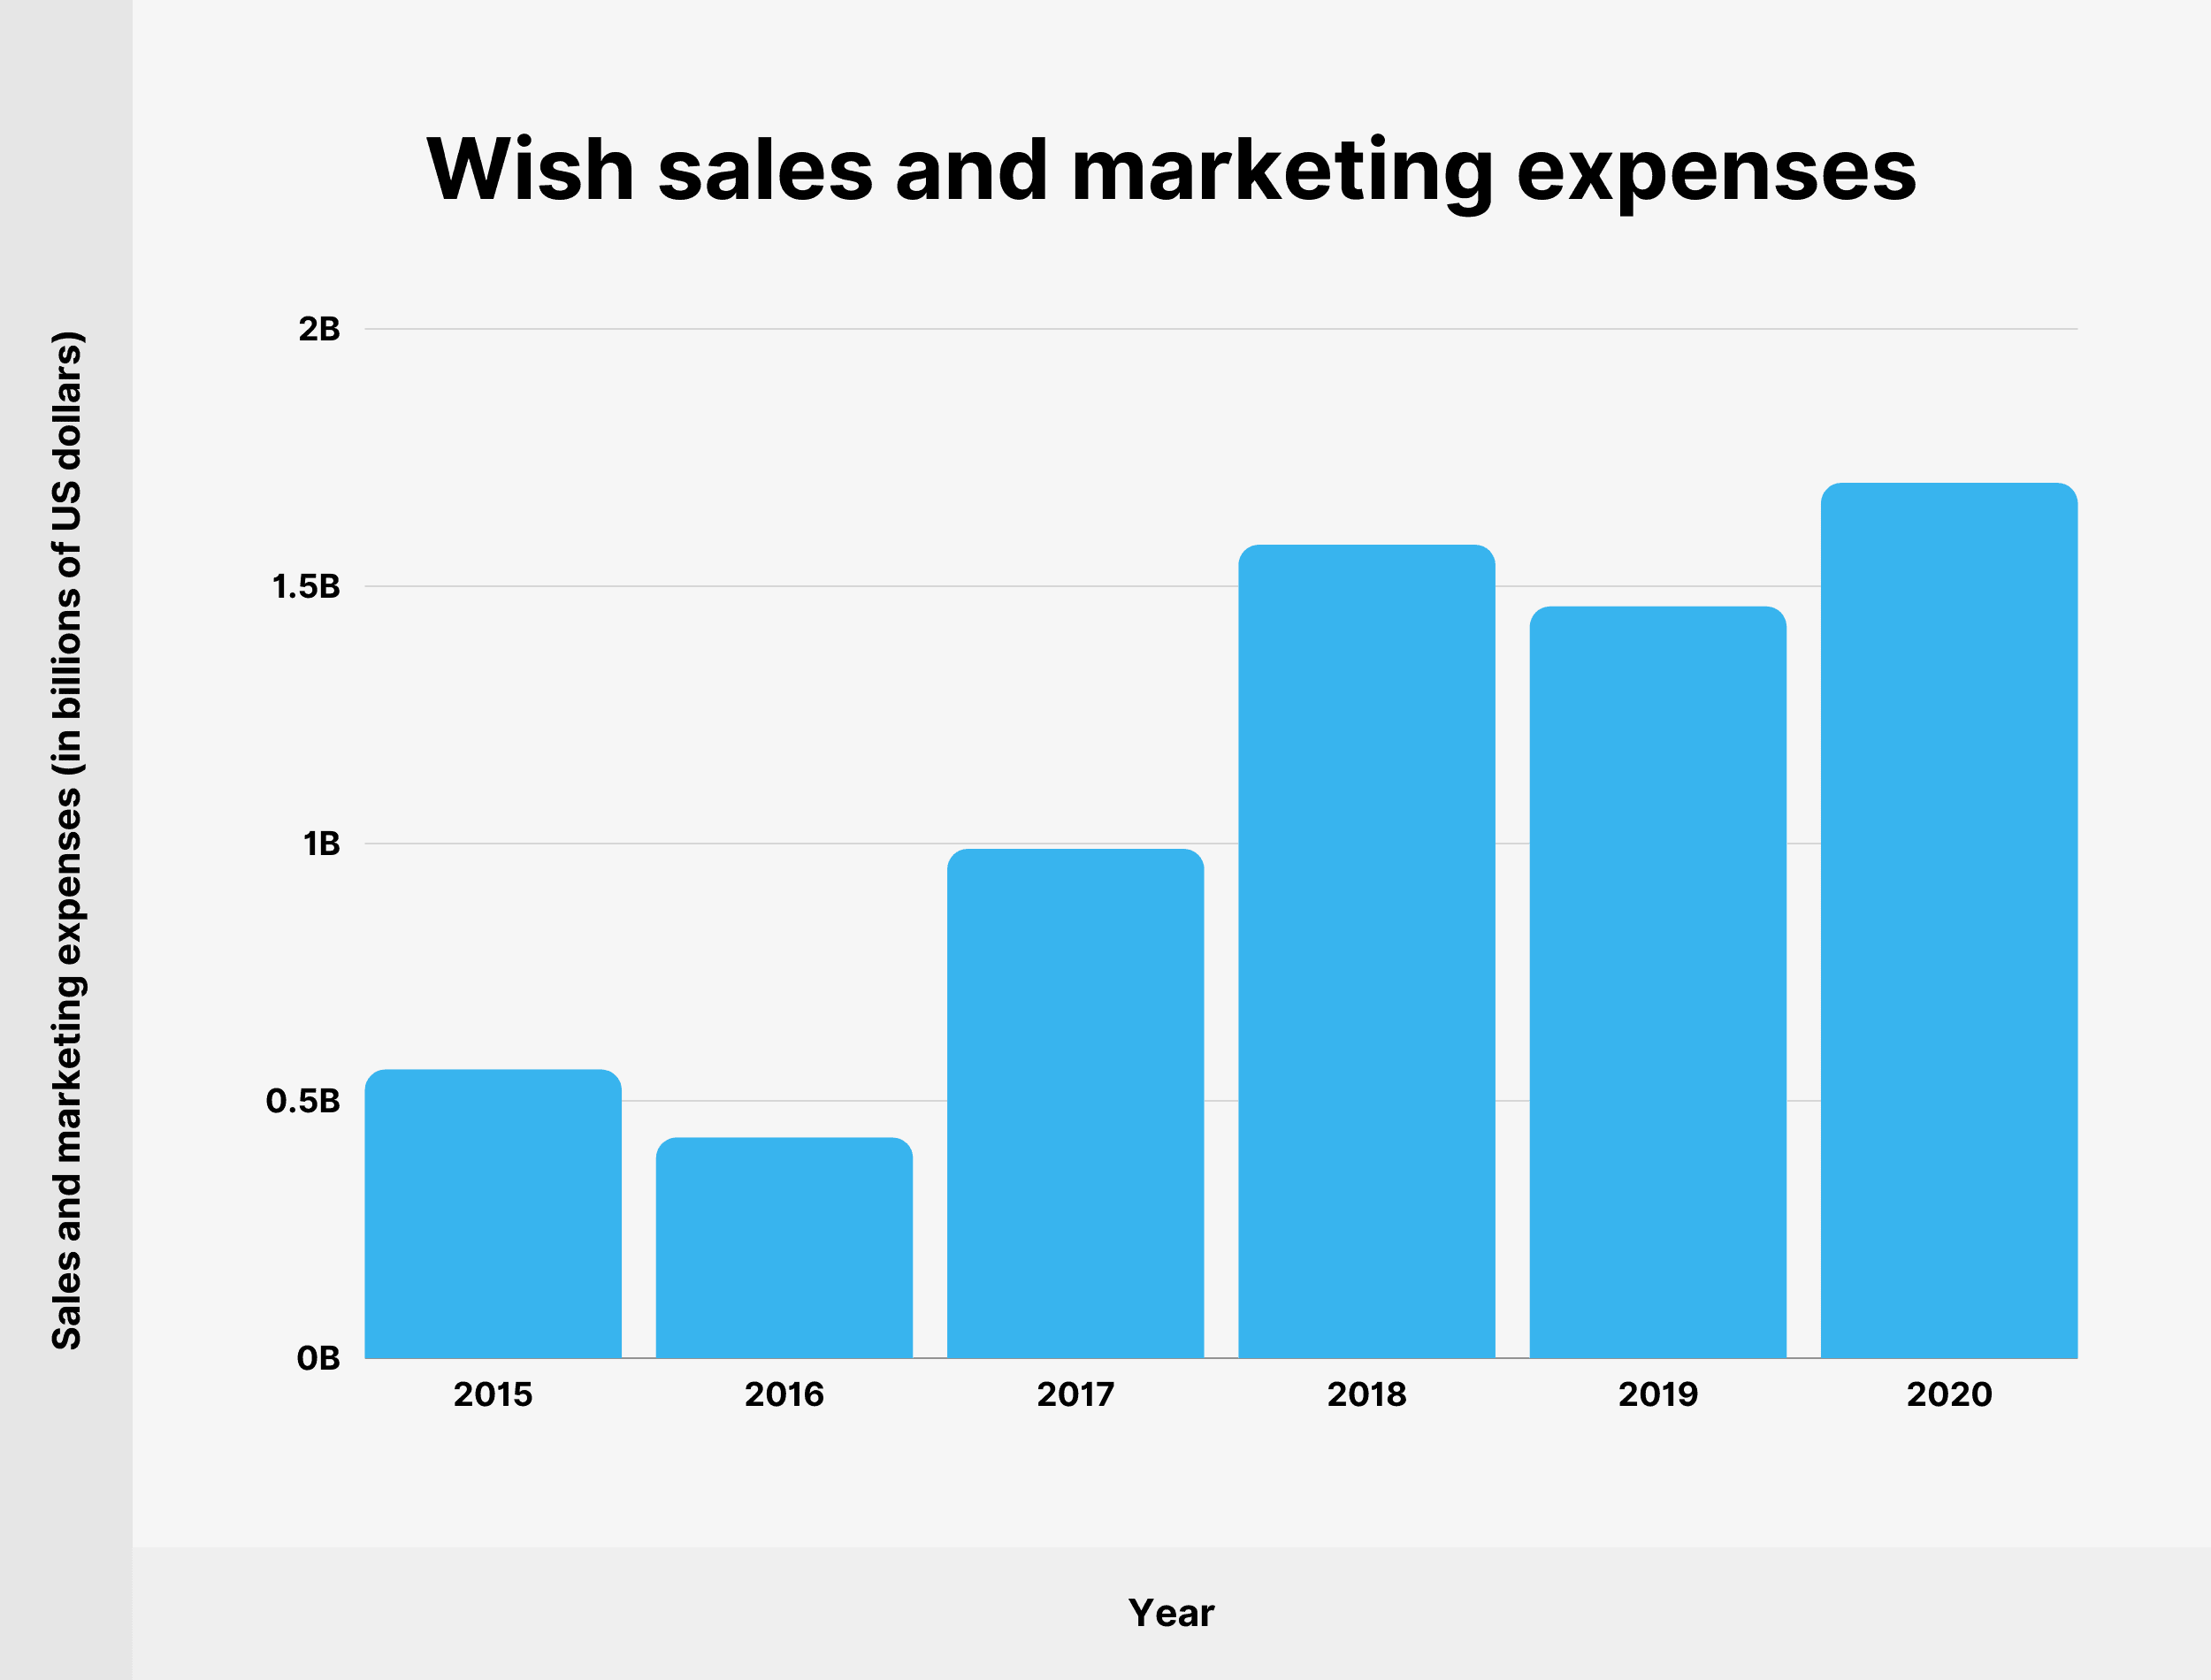 Wish sales and marketing expenses